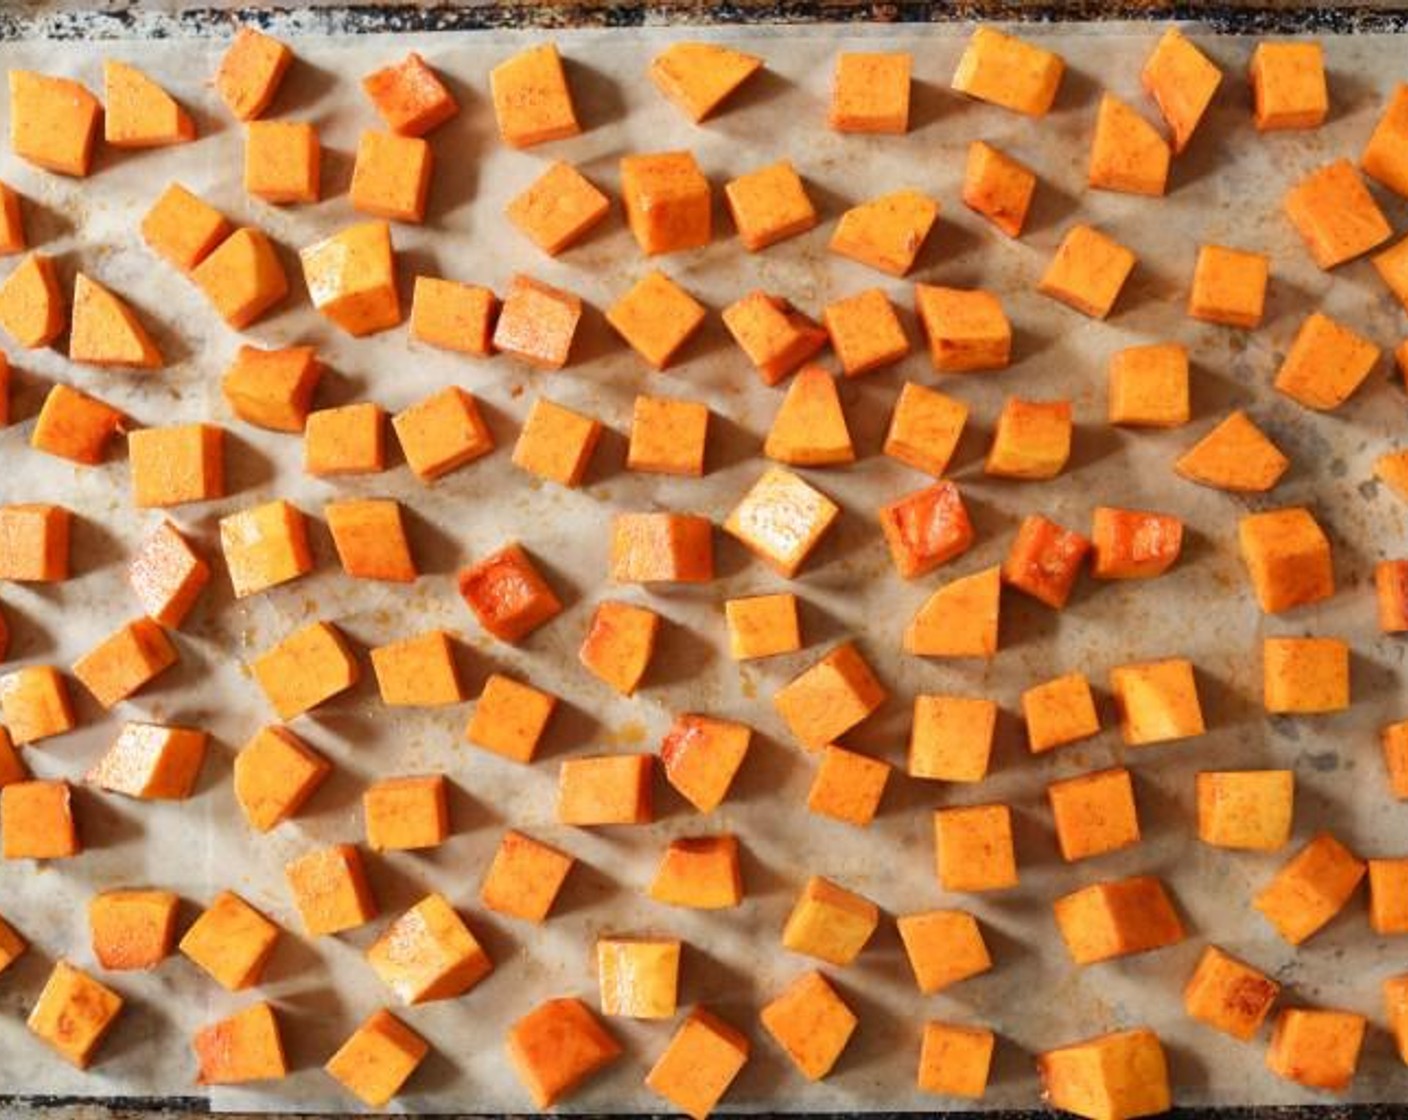 step 2 Place the cubed Butternut Squash (1) in a mixing bowl. Drizzle with Extra-Virgin Olive Oil (1 1/2 Tbsp) and sprinkle with Ground Cinnamon (1/2 tsp). Add a healthy pinch of Kosher Salt (to taste) and Cayenne Pepper (1 pinch) and toss to combine, making sure each cube is coated.